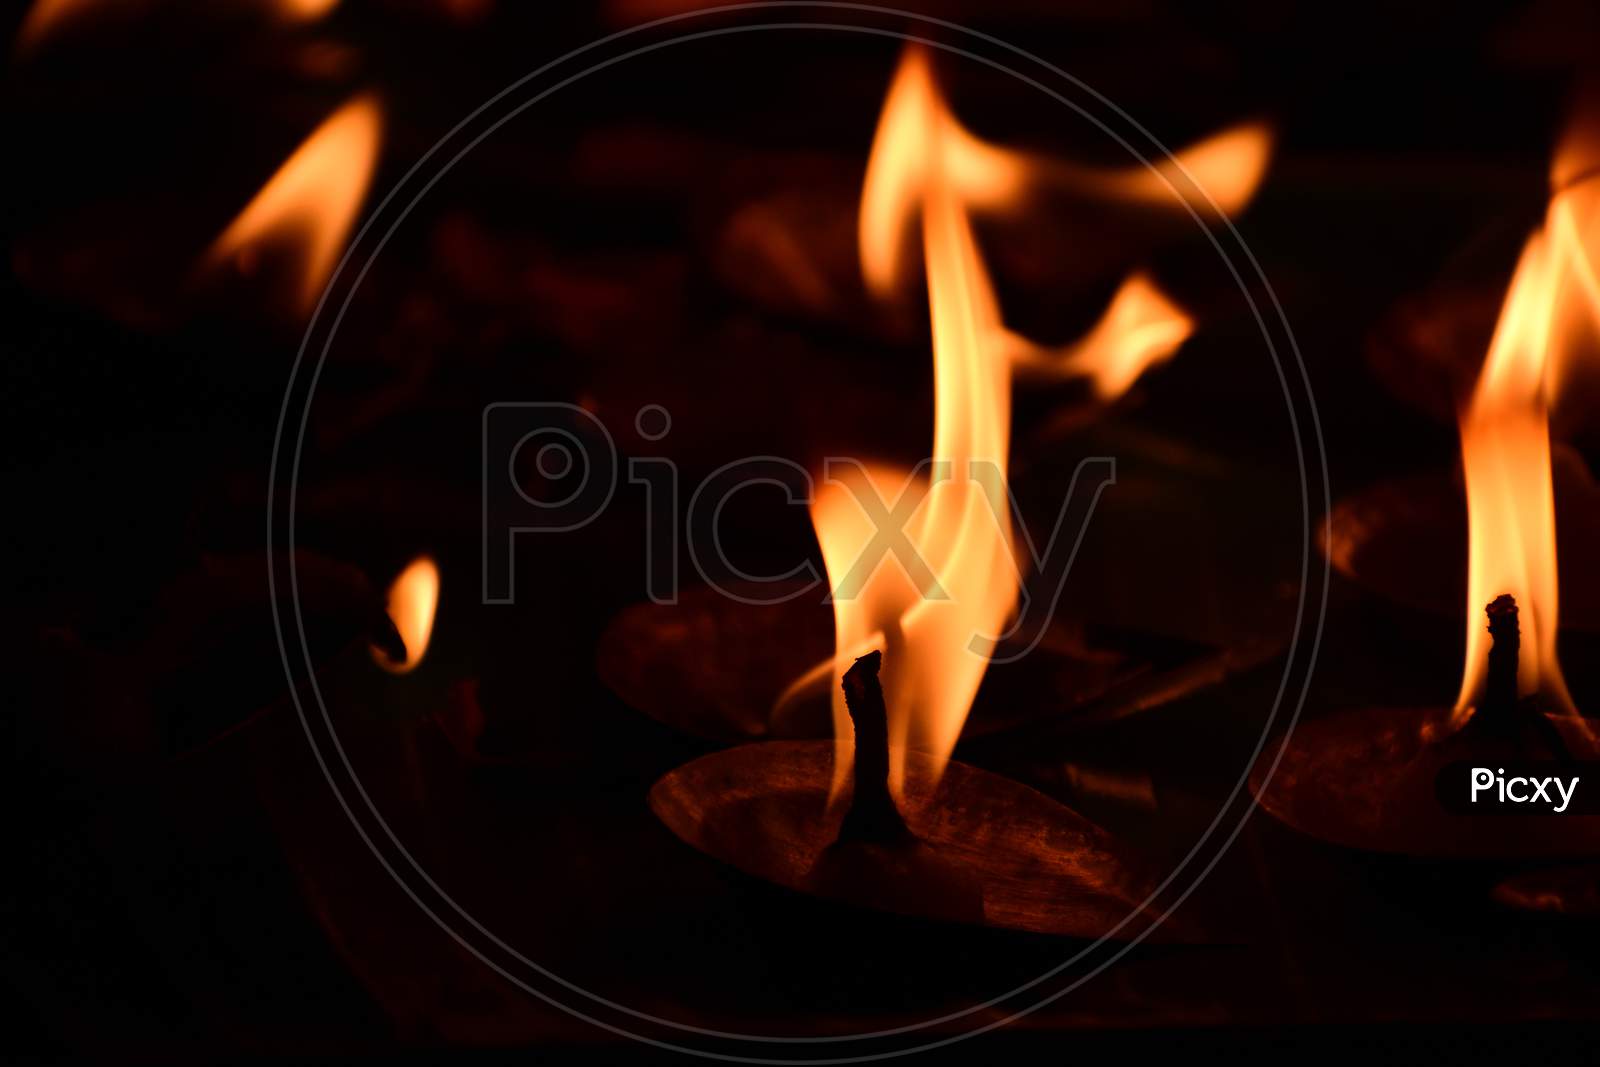 Creative Photography Of Many Realistic Burning Oil Lamps, Candles In Diwali, An Indian Festival In Evening. Colorful Red, Yellow Orange Fire Flame Lit On Dark Night Background With Noise Grain Effect.